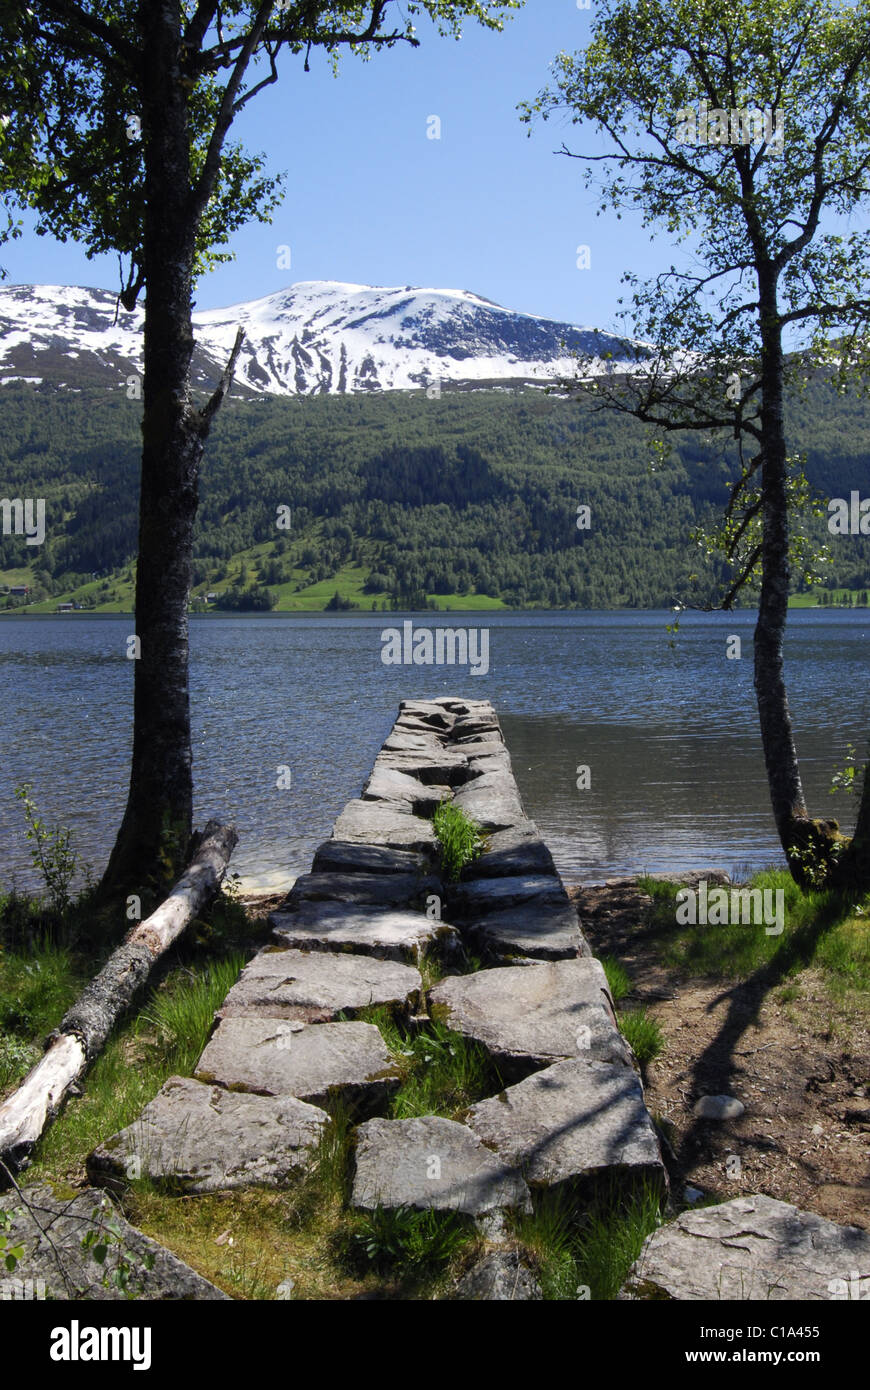 Stone jetty at Jølstravatnet, Sogn og Fjordane county, Norway, with lake and mountains in background Stock Photo